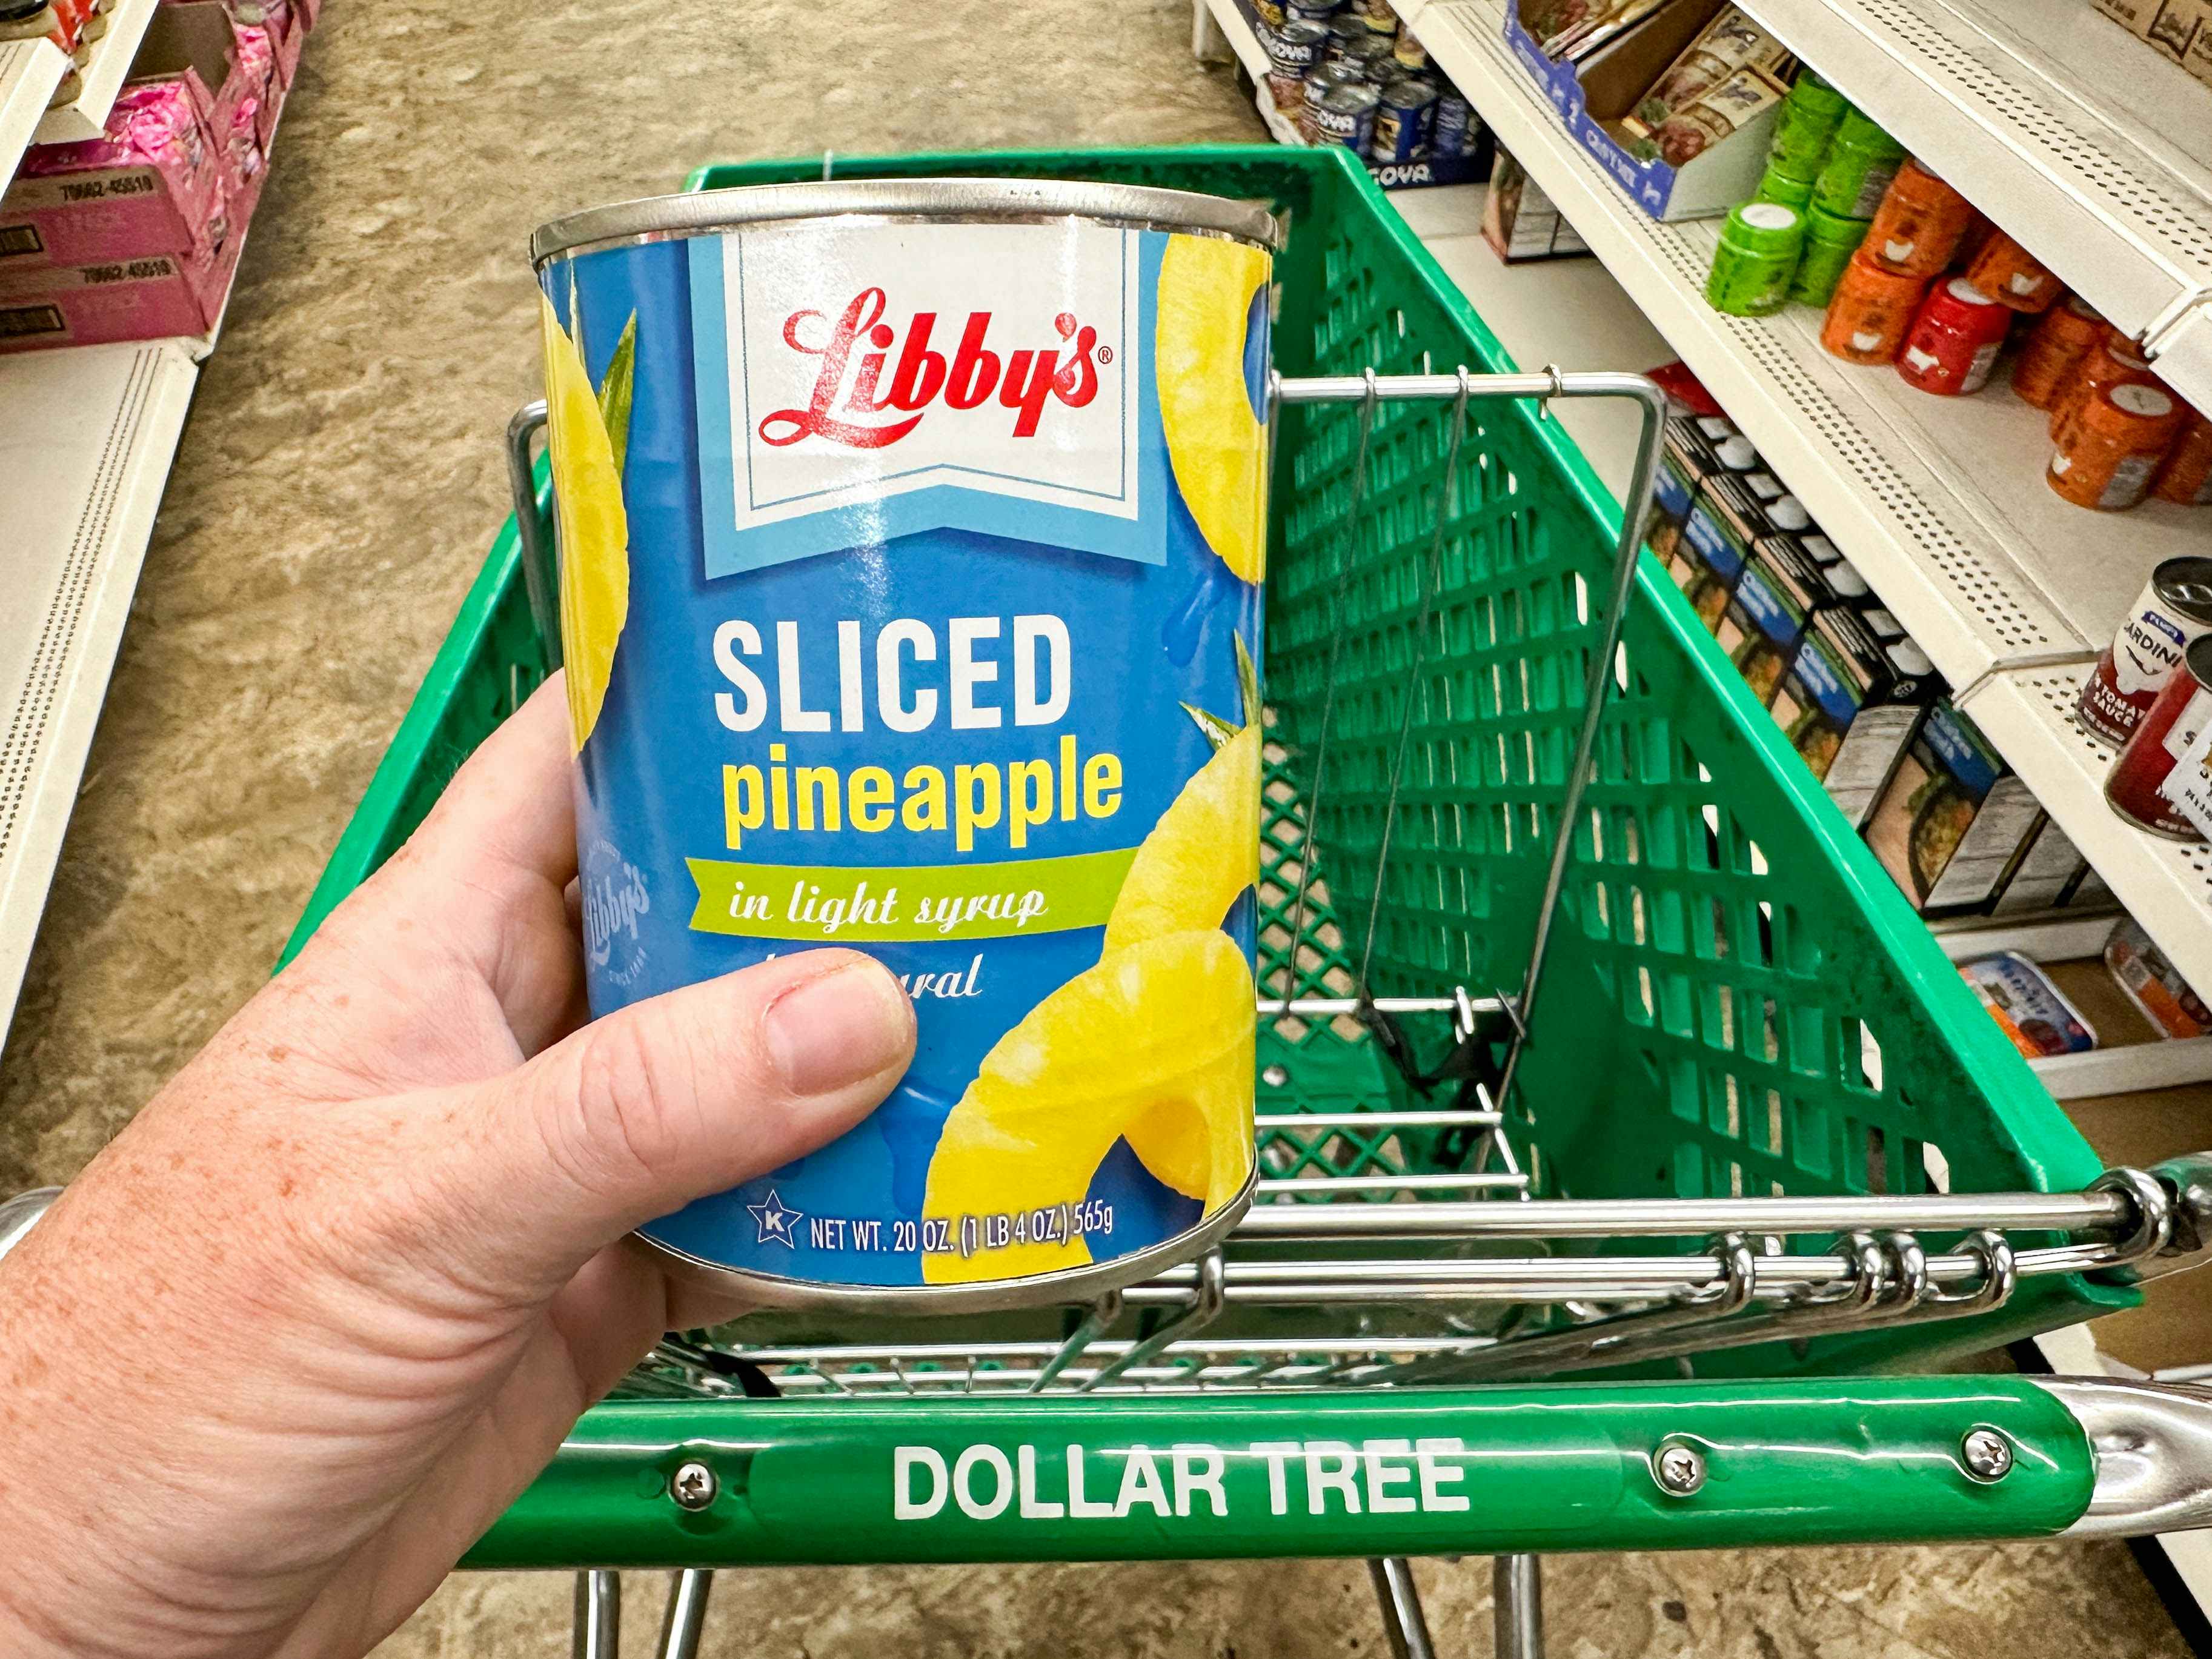 Food Items You Should and Shouldn't Buy at the Dollar Tree – But